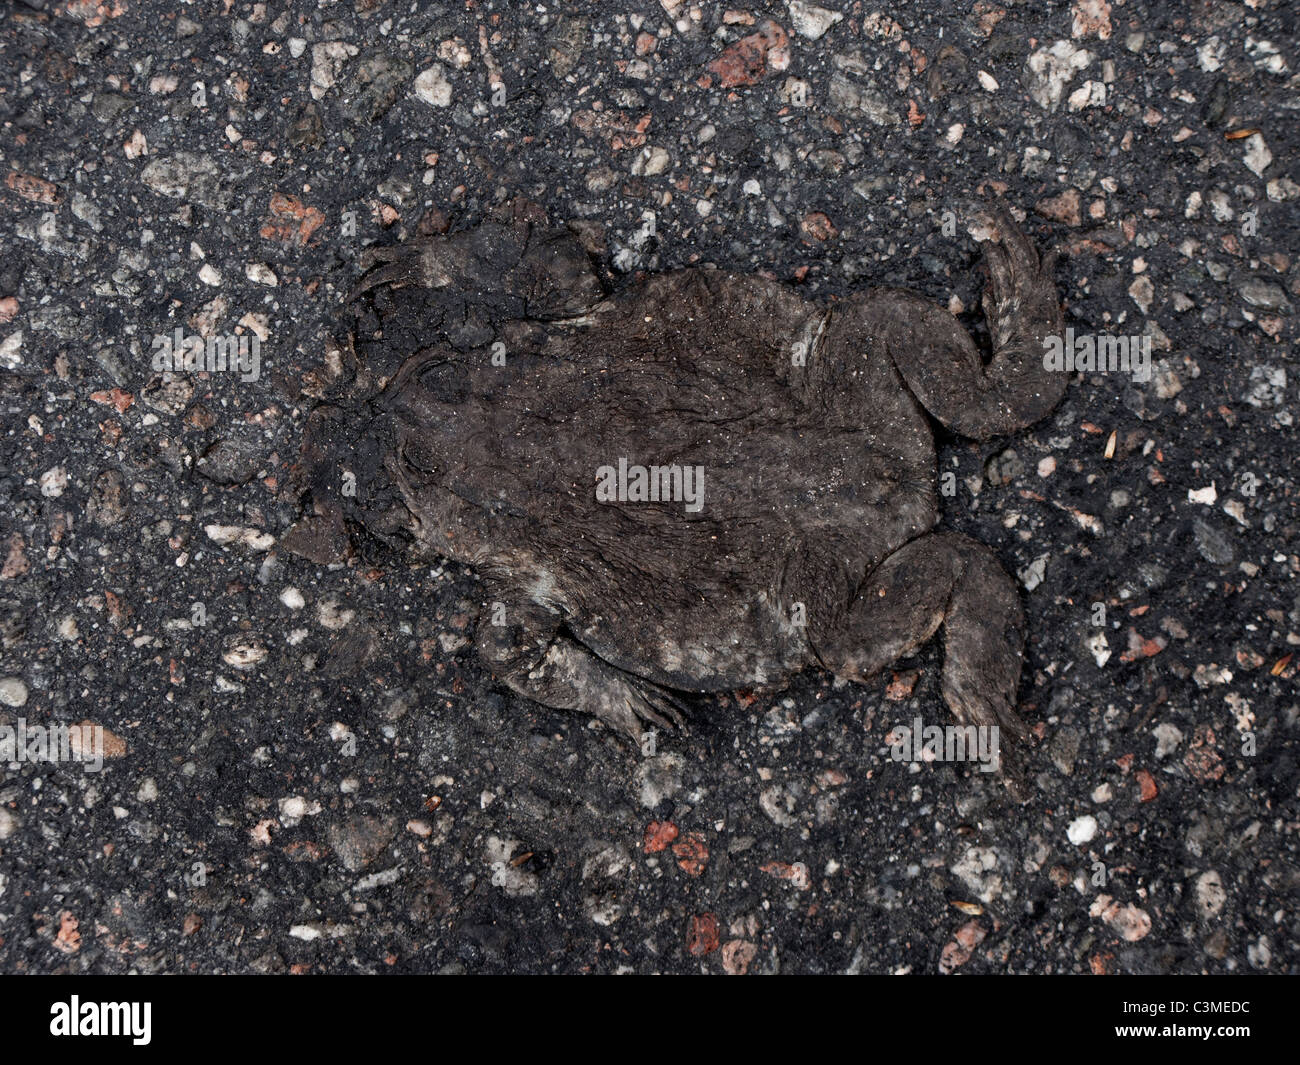 Flat toad, run-over by a car Stock Photo